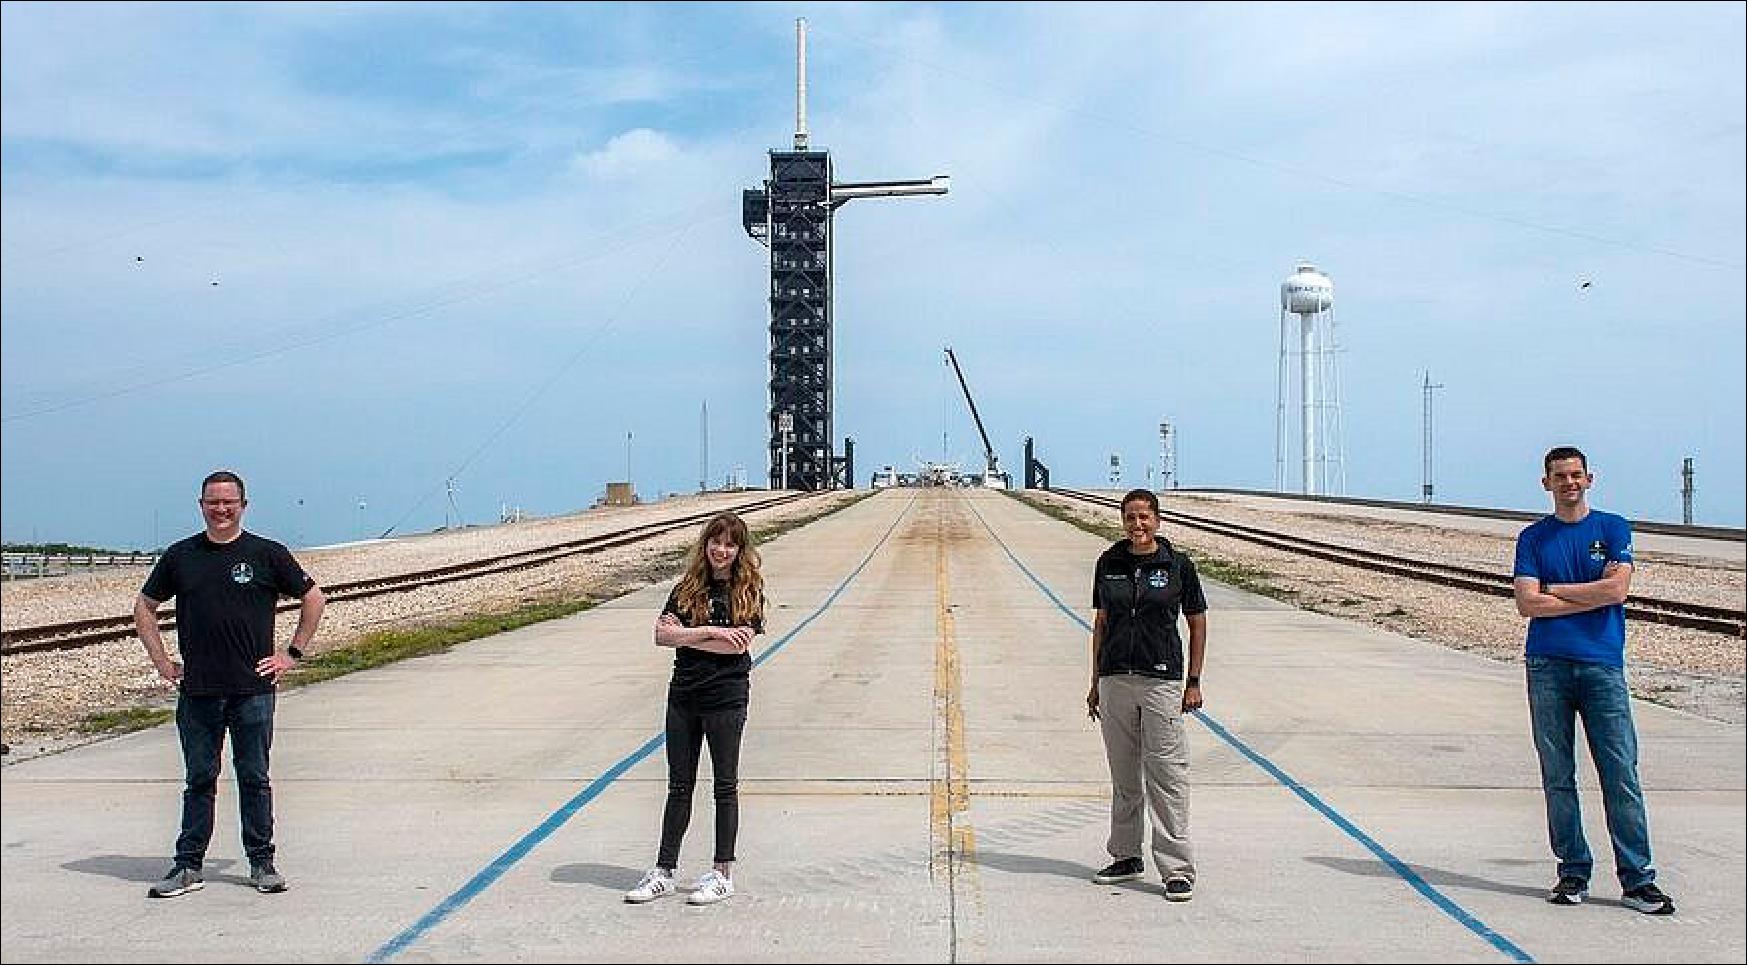 Figure 1: The four people flying on the Inspiration4 mission — Chris Sembroski, Hayley Arceneaux, Sian Proctor and Jared Isaacman — stand at Launch Complex 39A at the Kennedy Space Center, where their Crew Dragon will launch as soon as Sept. 15 (image credit: SpaceX)